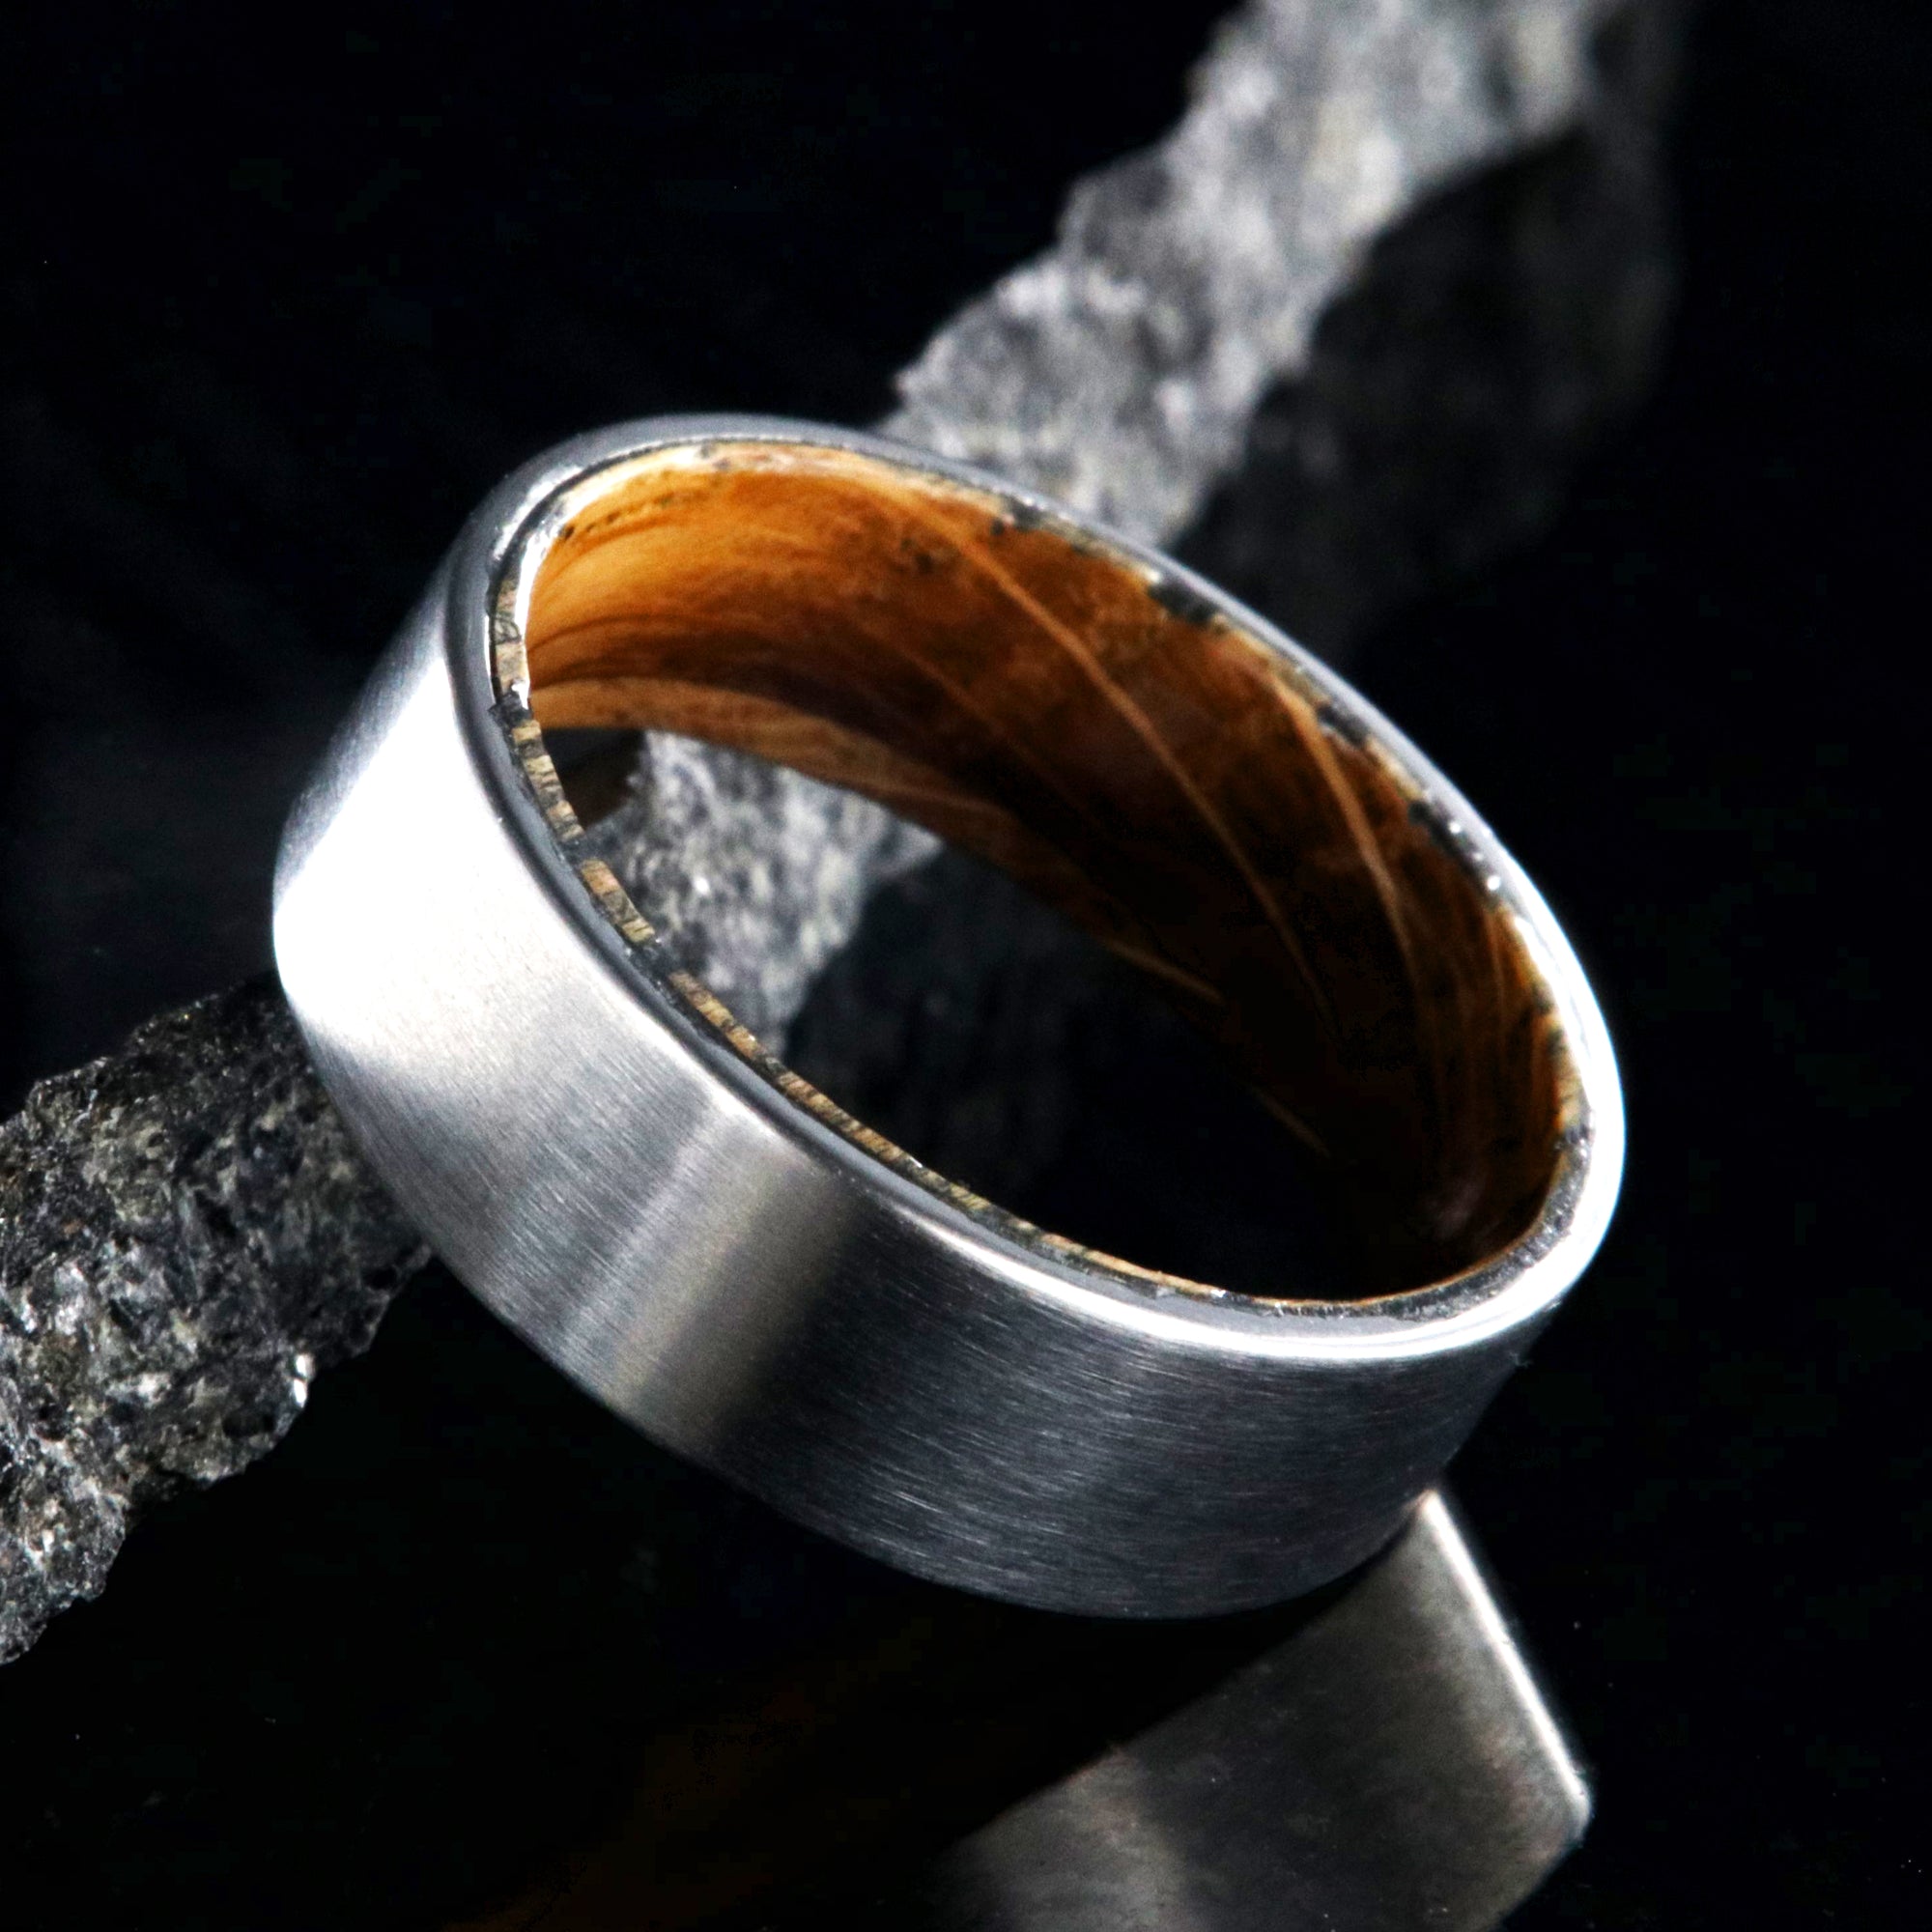 7mm wide titanium wedding band with a flat profile and whiskey barrel sleeve